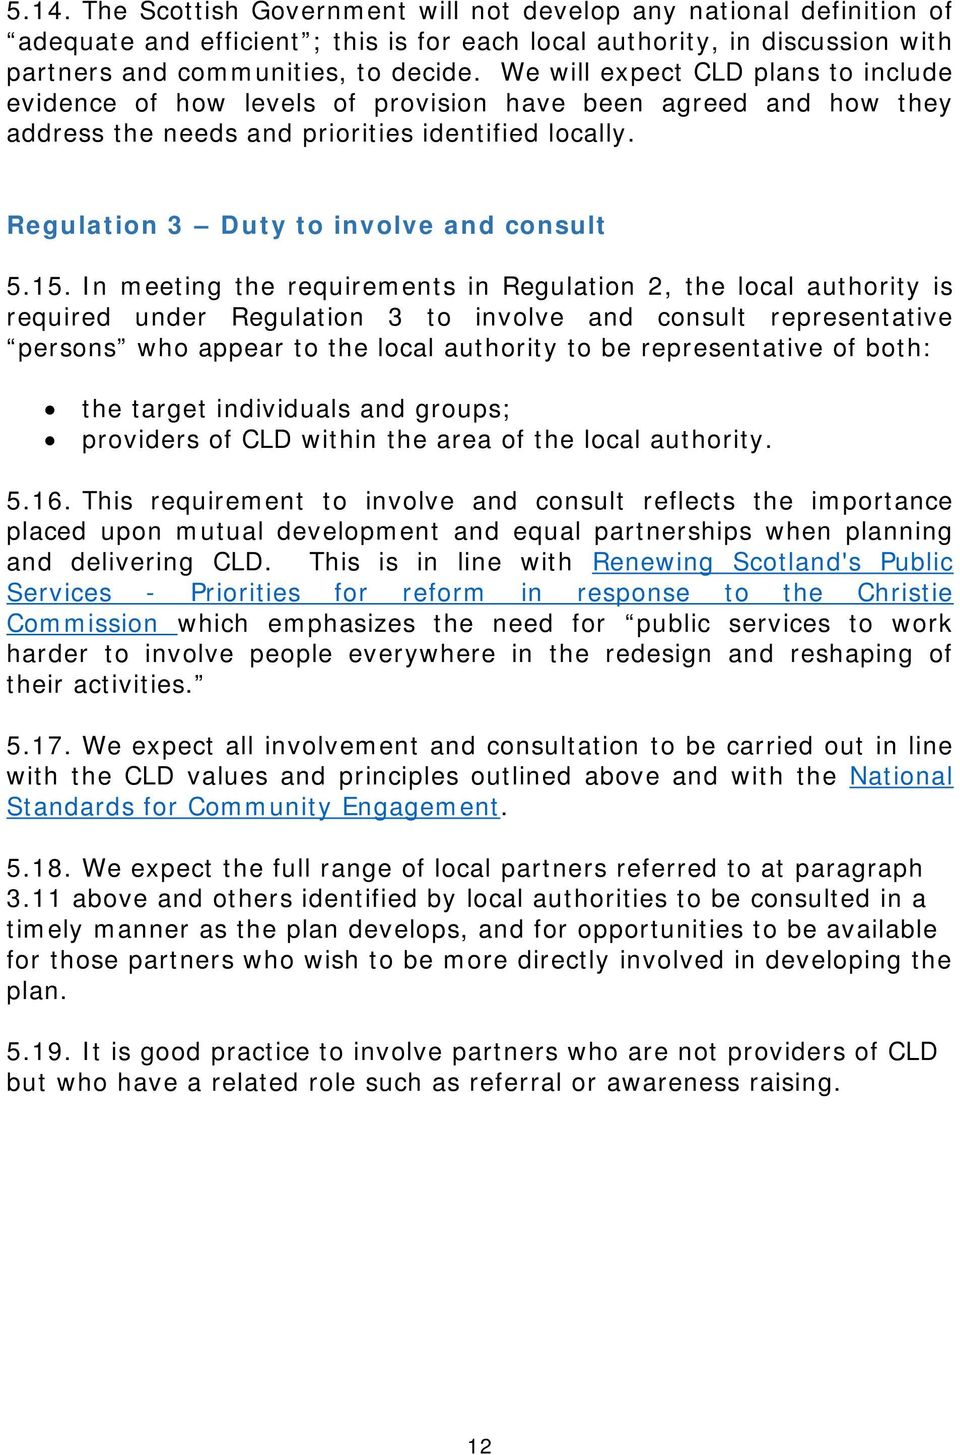 15. In meeting the requirements in Regulation 2, the local authority is required under Regulation 3 to involve and consult representative persons who appear to the local authority to be